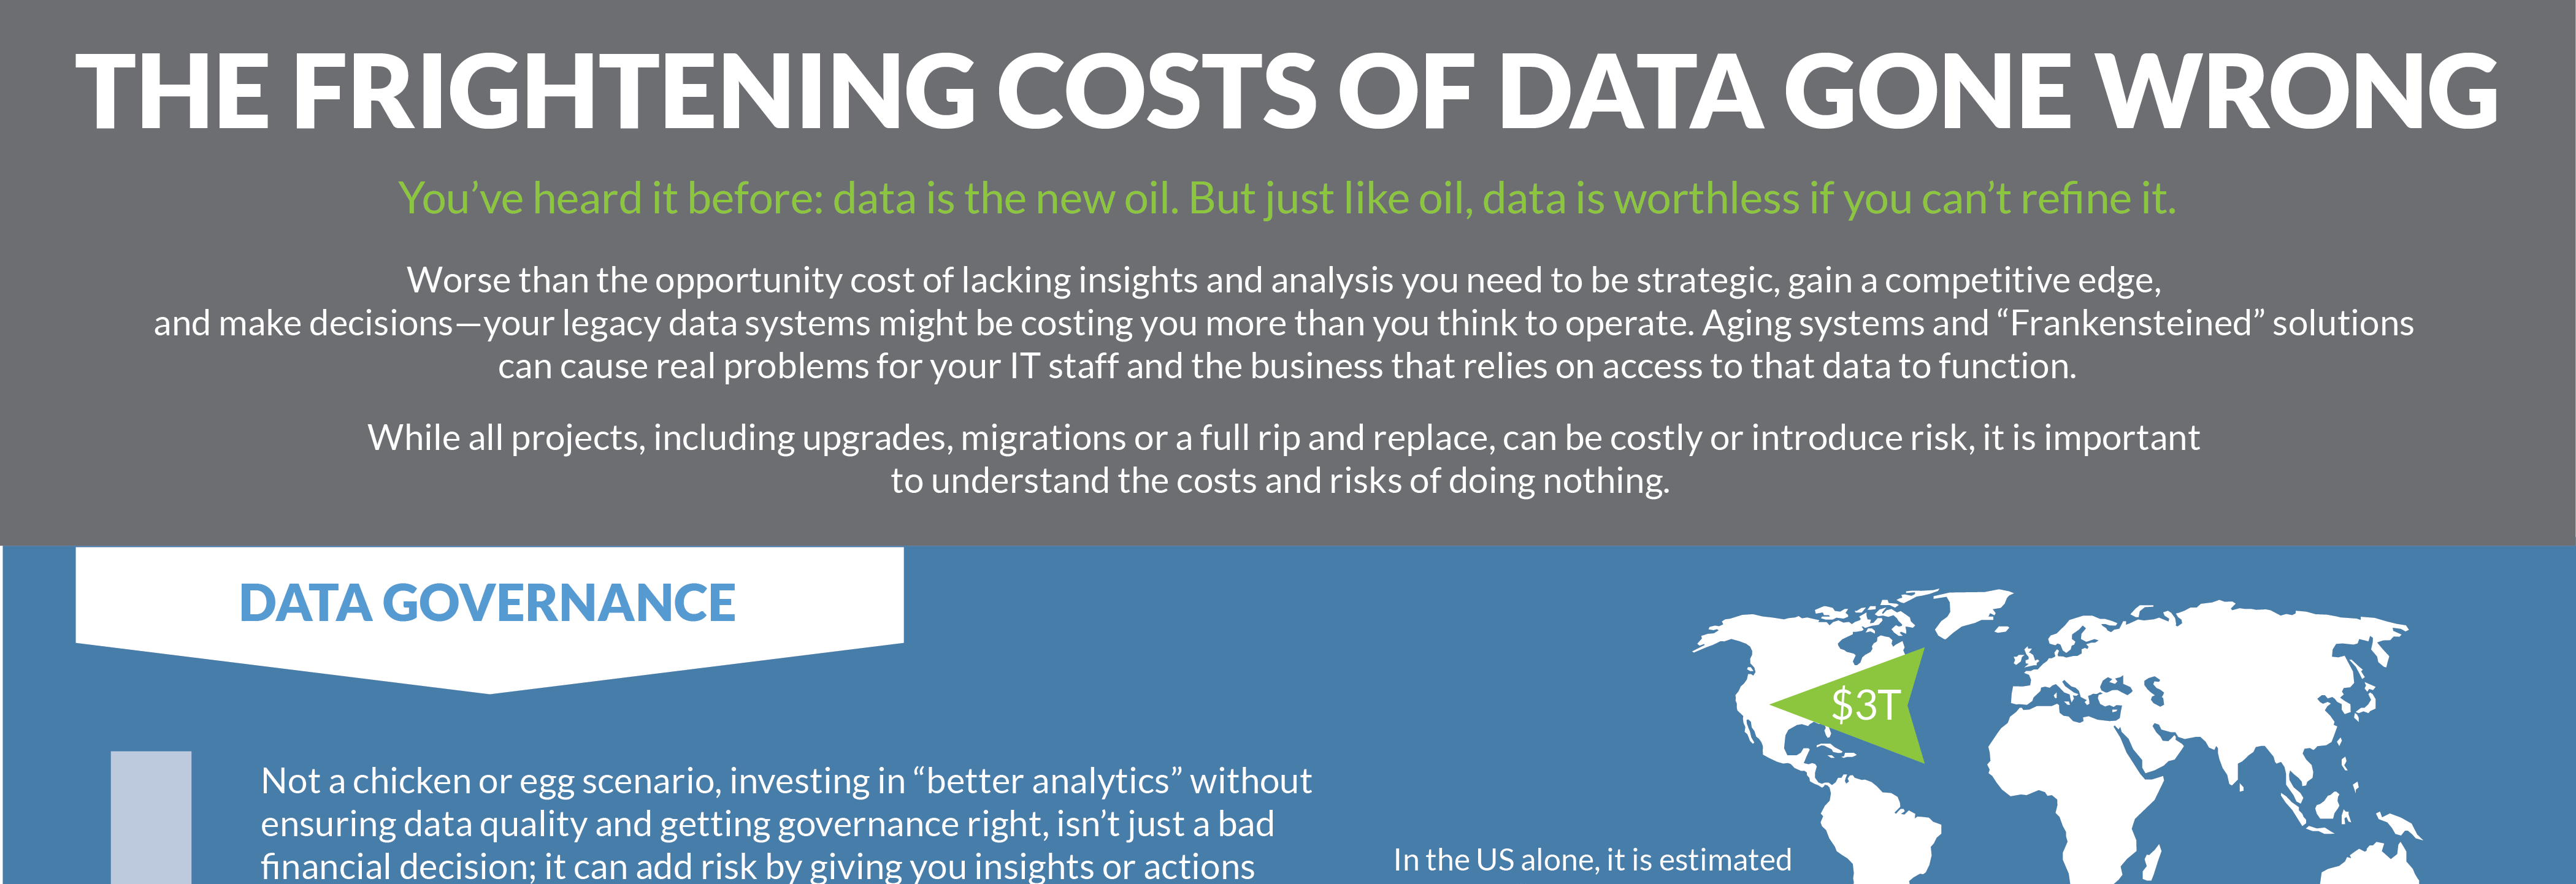 The Frightening Costs of Data Gone Wrong_AMTRA Solutions_Cropped-1.png